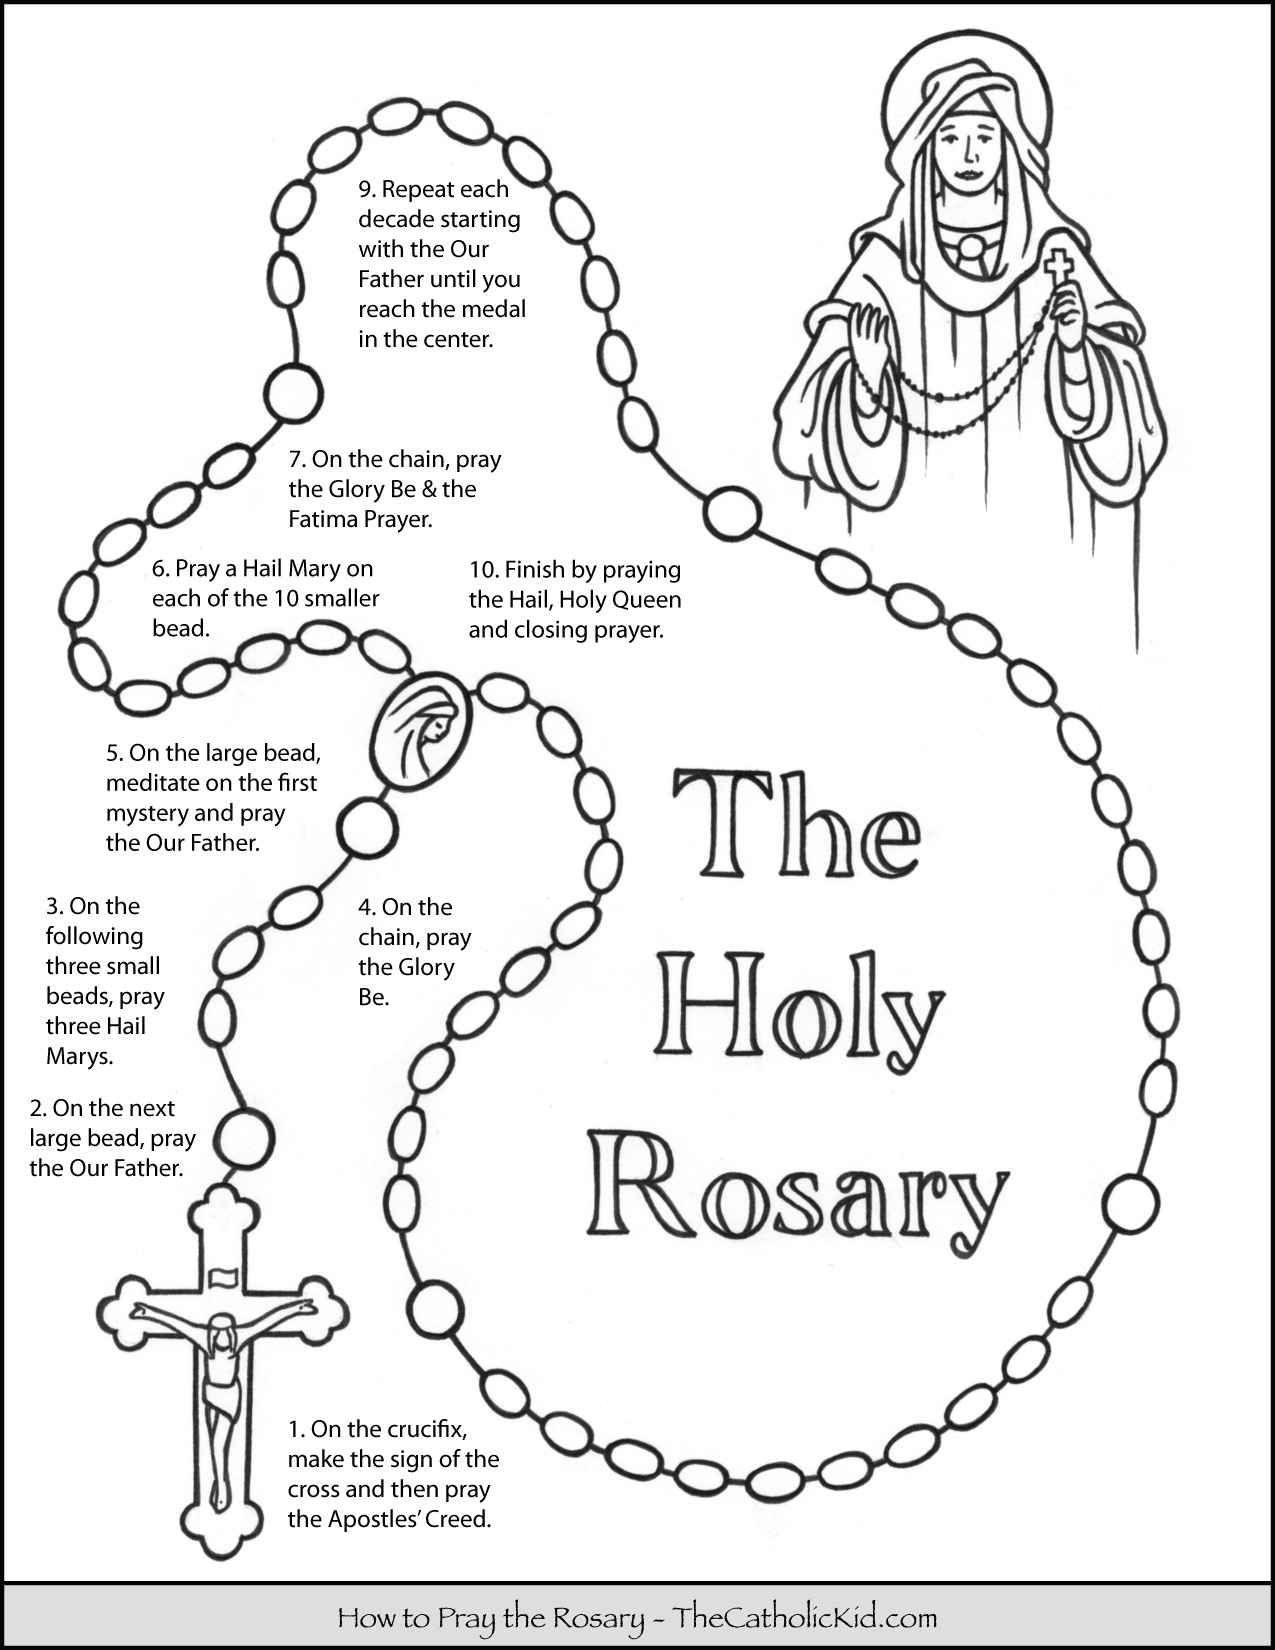 How To Pray The Rosary Coloring Page For Kids - Thecatholickid | Free Printable Rosary Worksheets